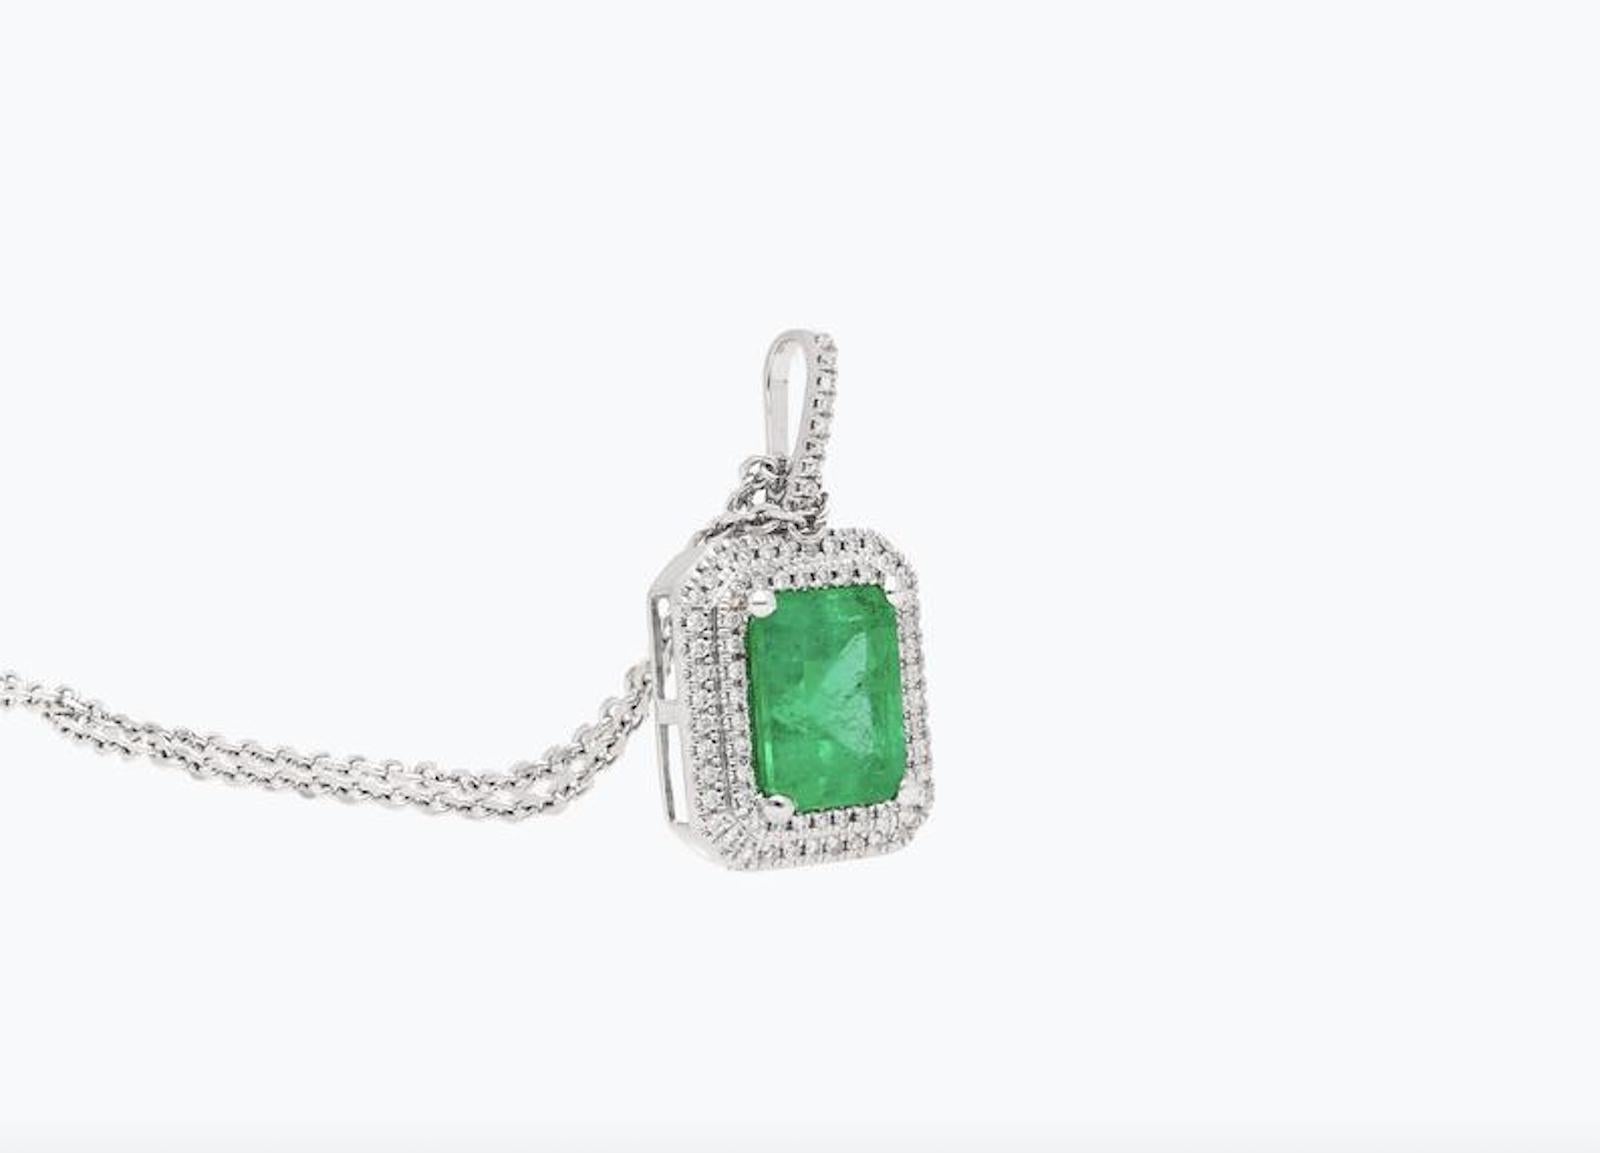 Details:

✔Gemstone: Emerald
✔ Emerald Weight: 2.15 carats
✔ Necklace length: 22 Inches; Pendant height: 13.2 Millimeters; Pendant width: 10.6 Millimeters
✔ Color: Vivid Green
✔ Emerald Origin: Colombia
✔ Cut: Emerald
✔ Measurements: Necklace